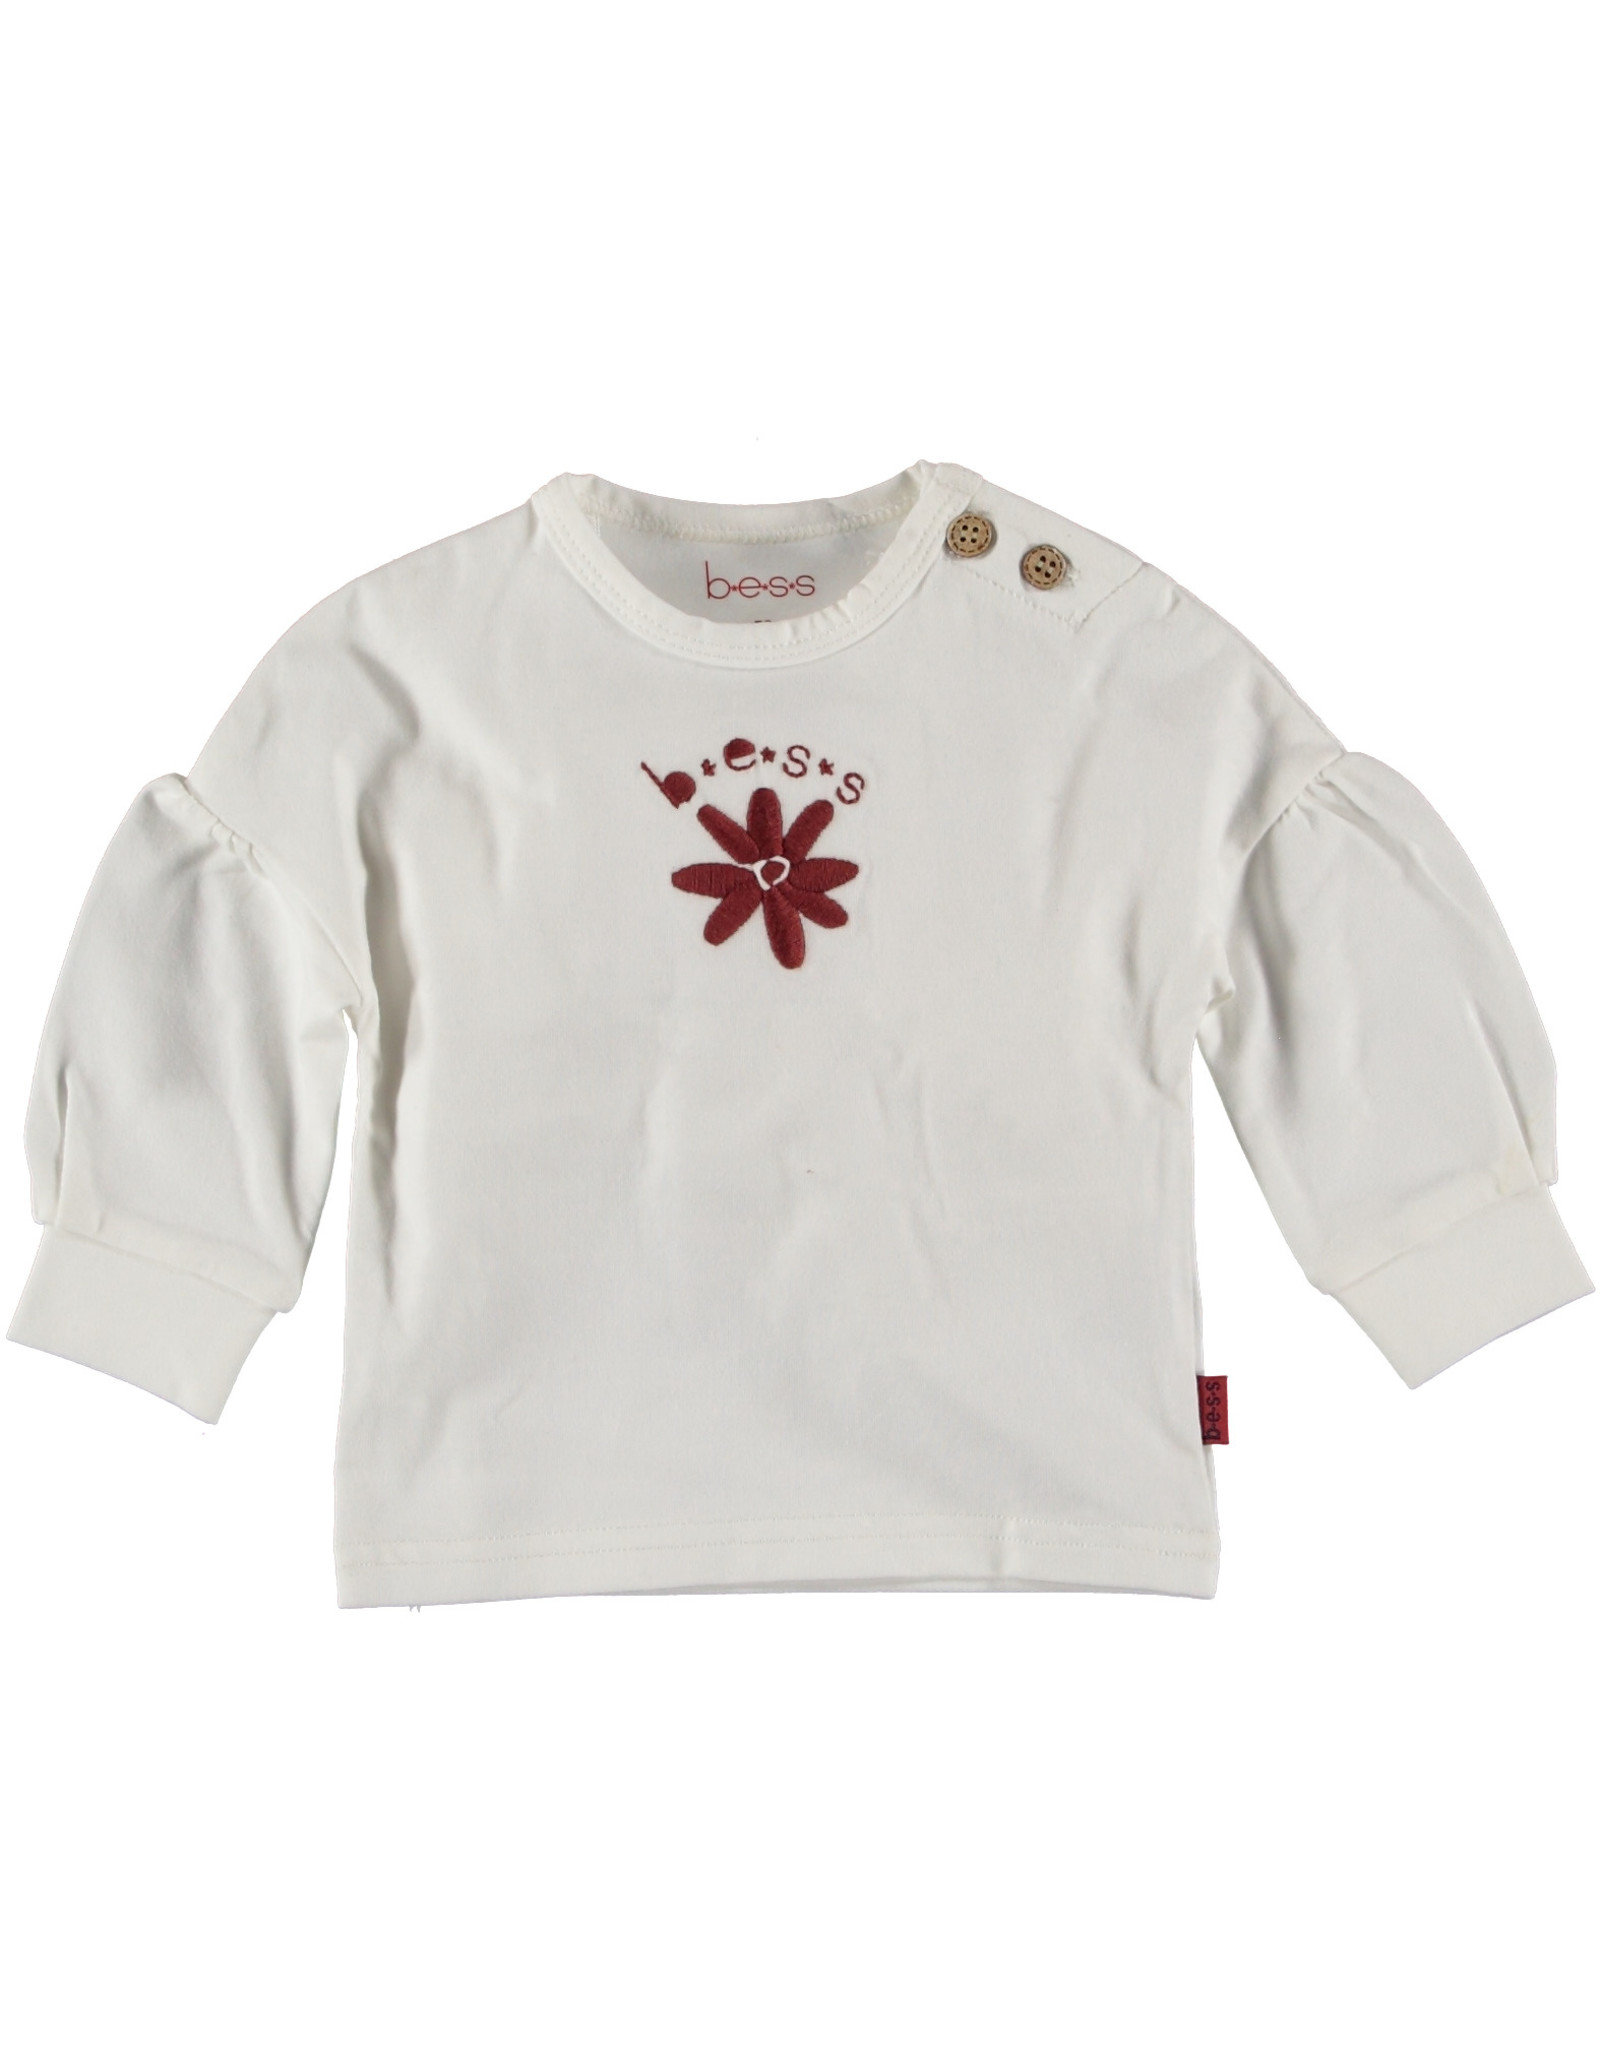 B.E.S.S. Shirt Flower Embroidery, Off White, W21